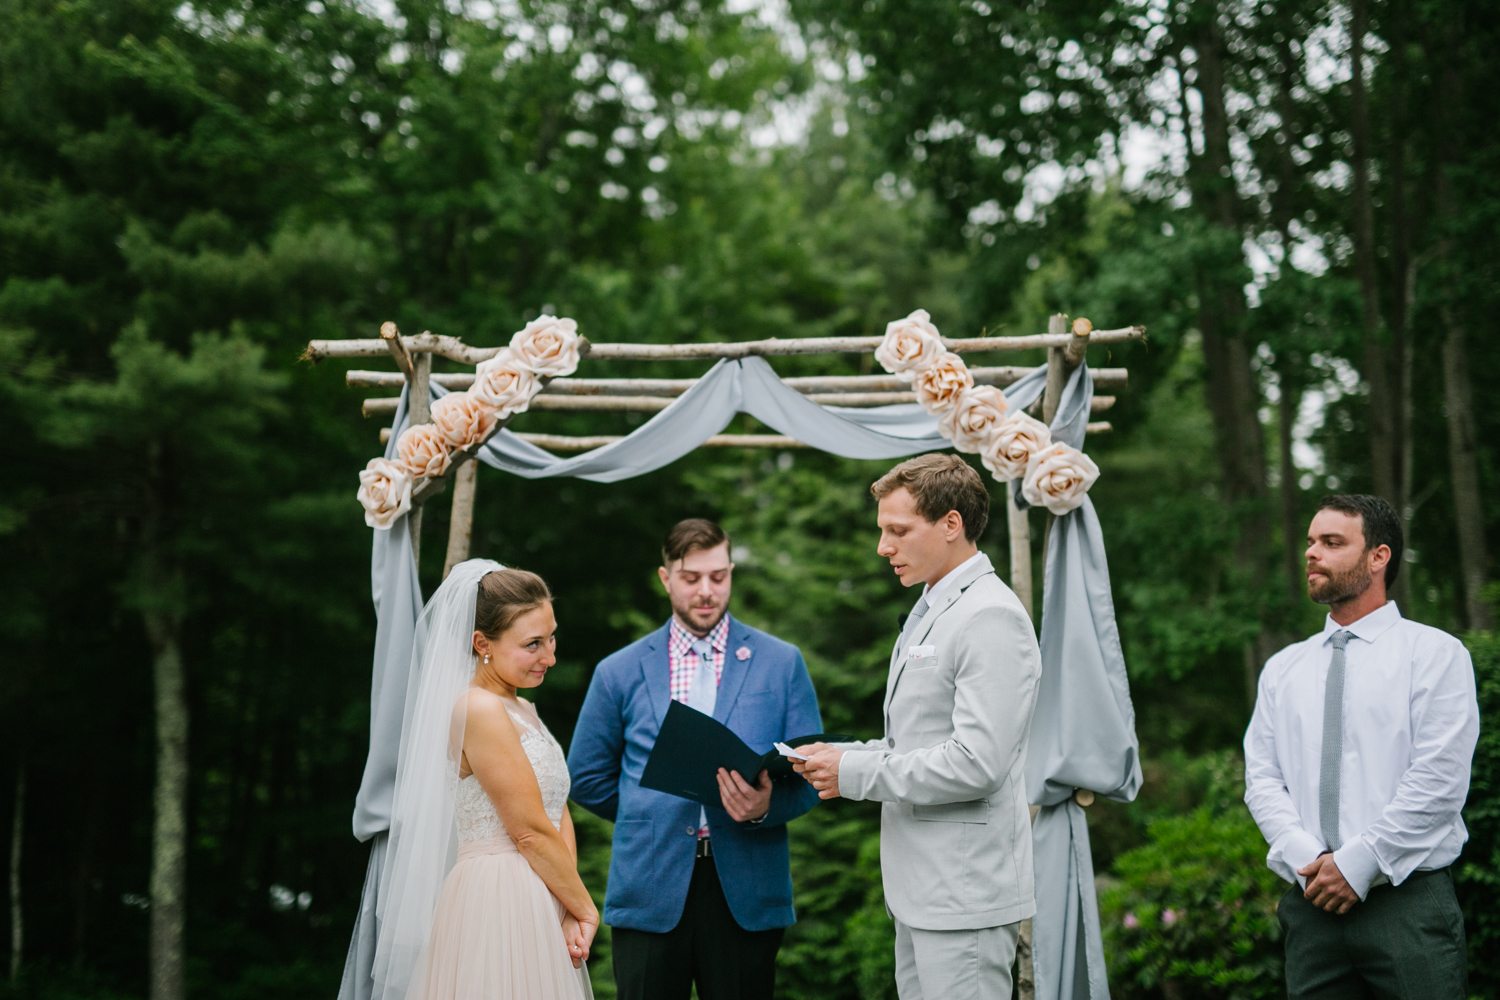 Emily Tebbetts Photography - back yard wedding gif atkinson nh confetti recessional bride and groom pizza truck -8.jpg